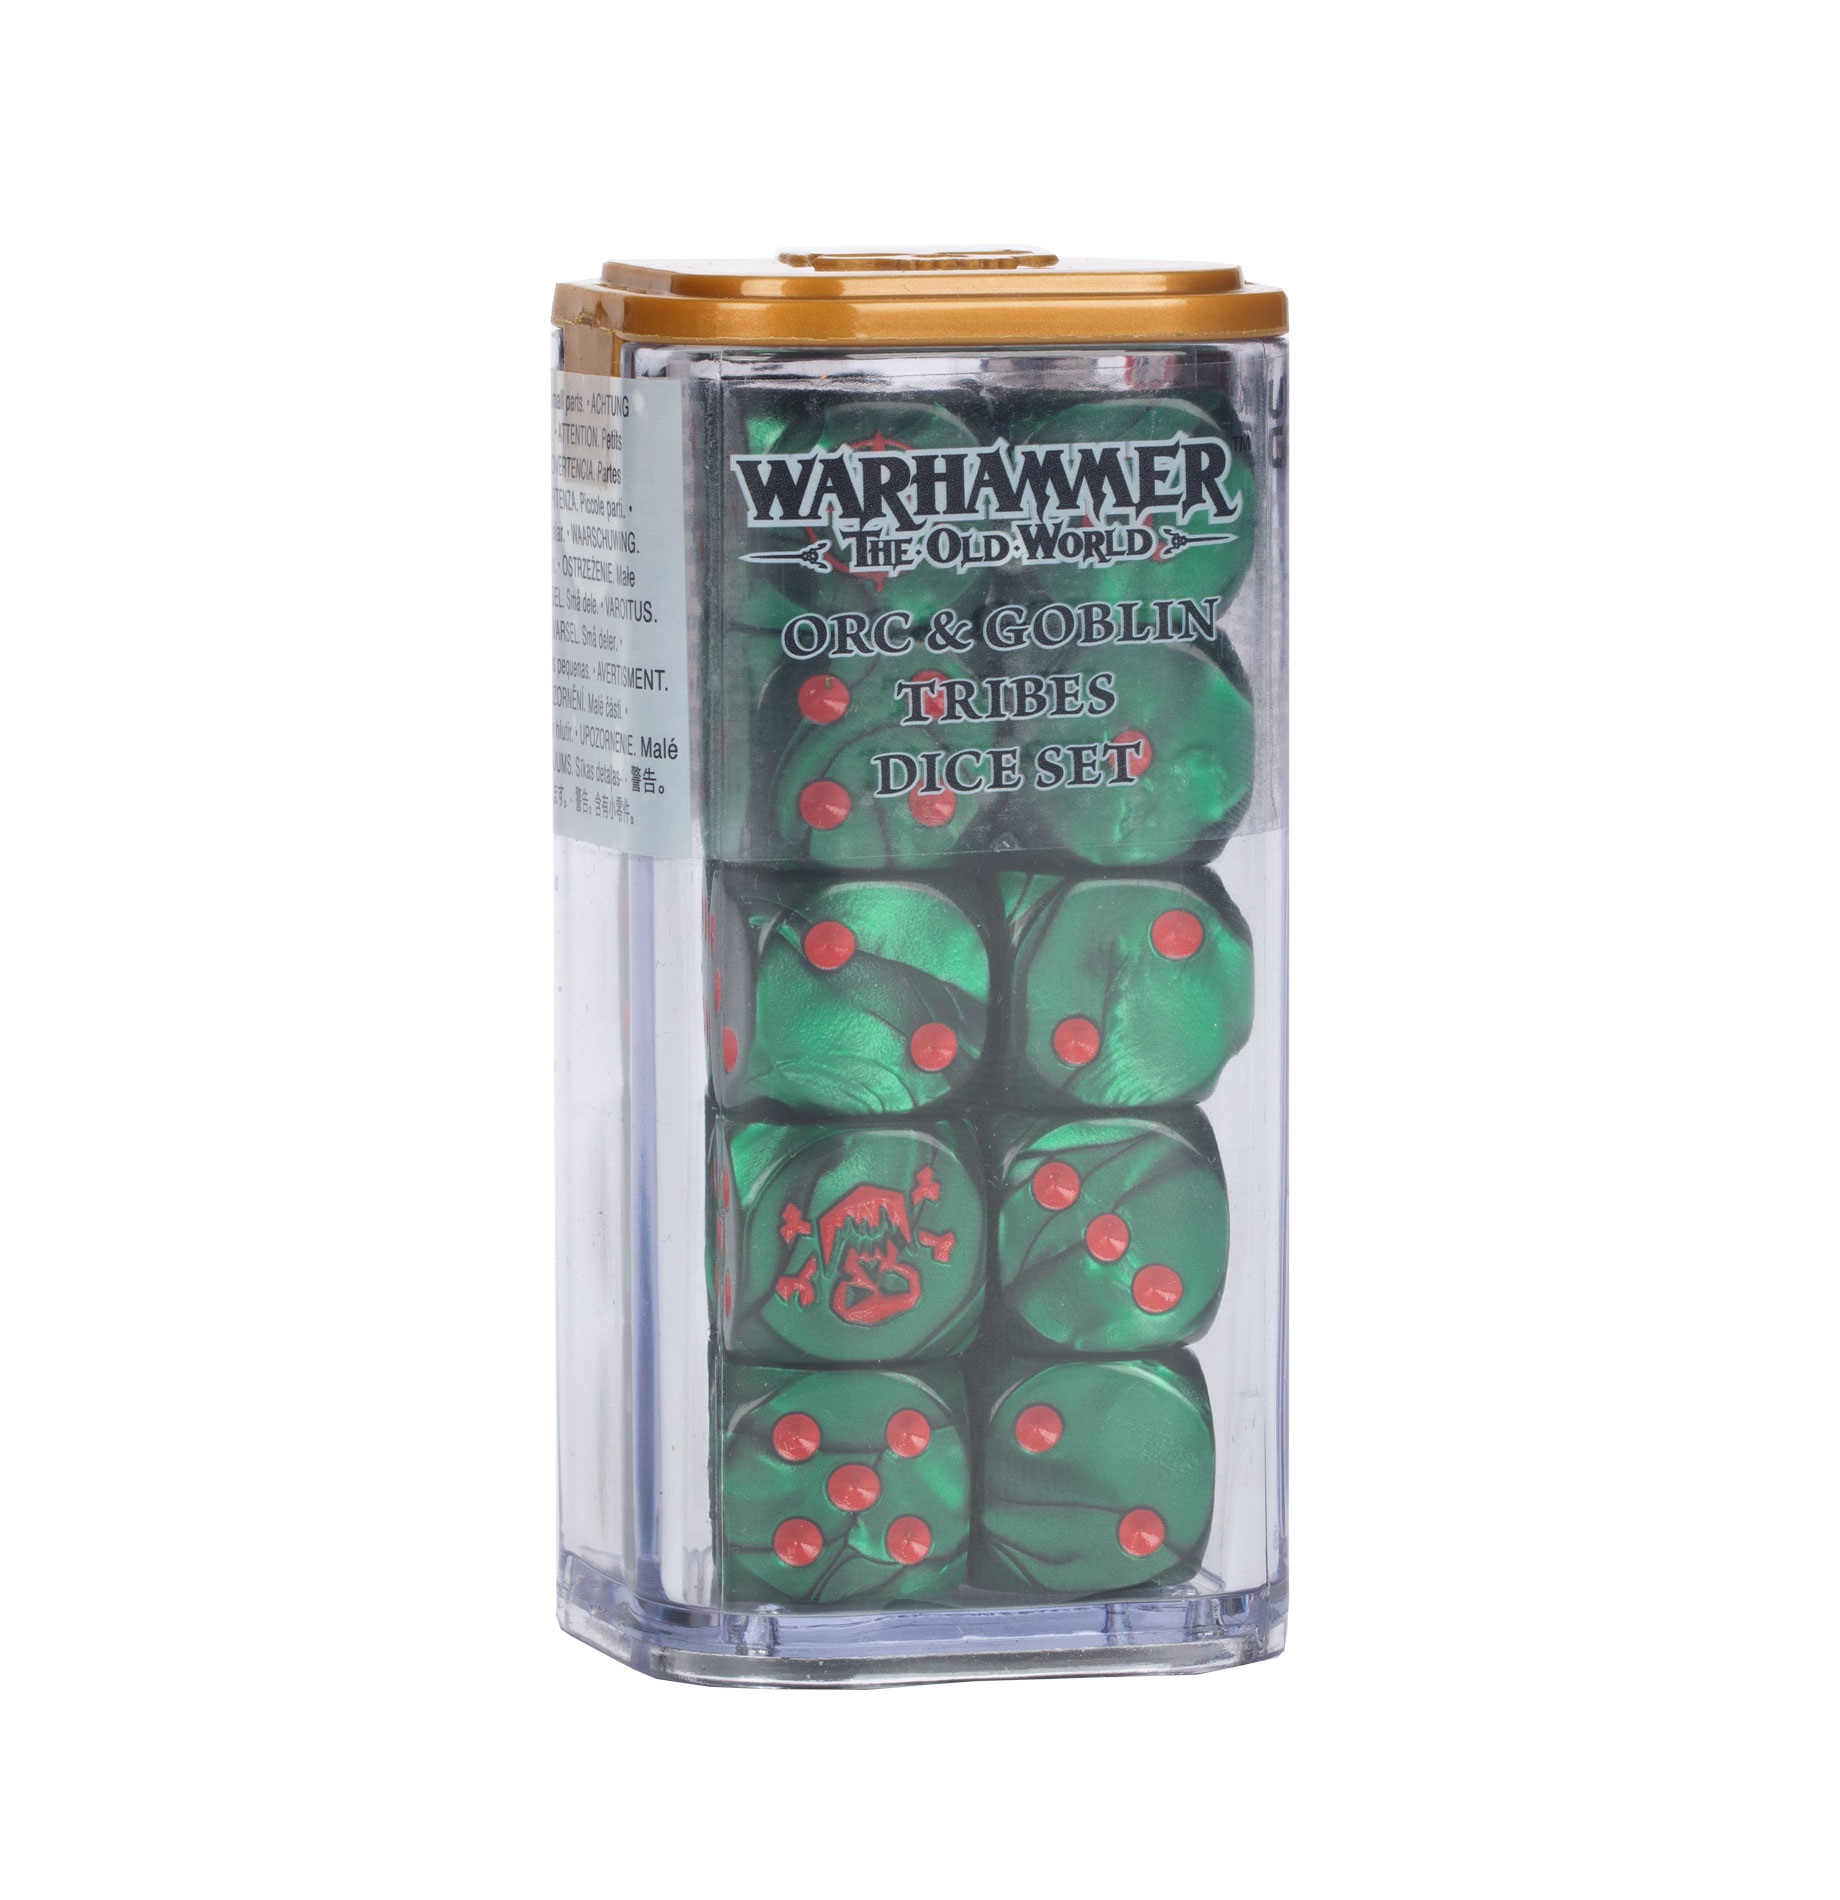 Orc & Goblin Tribes: Orc Dice